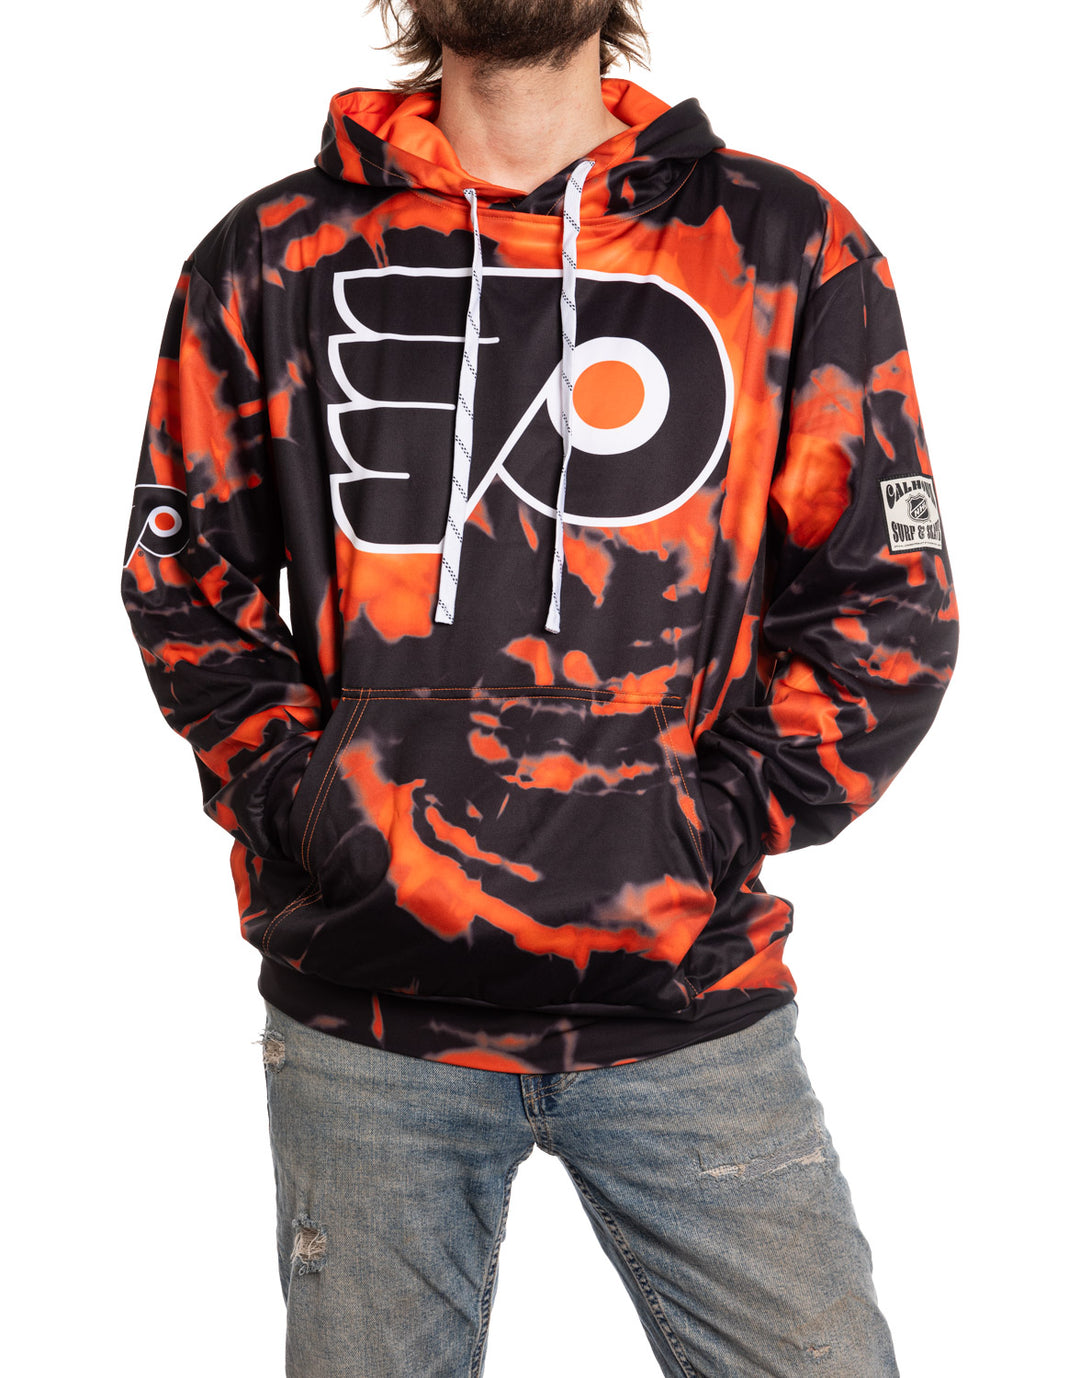 Official NHL licensed Philadelphia Flyers Sublimation Hoodie